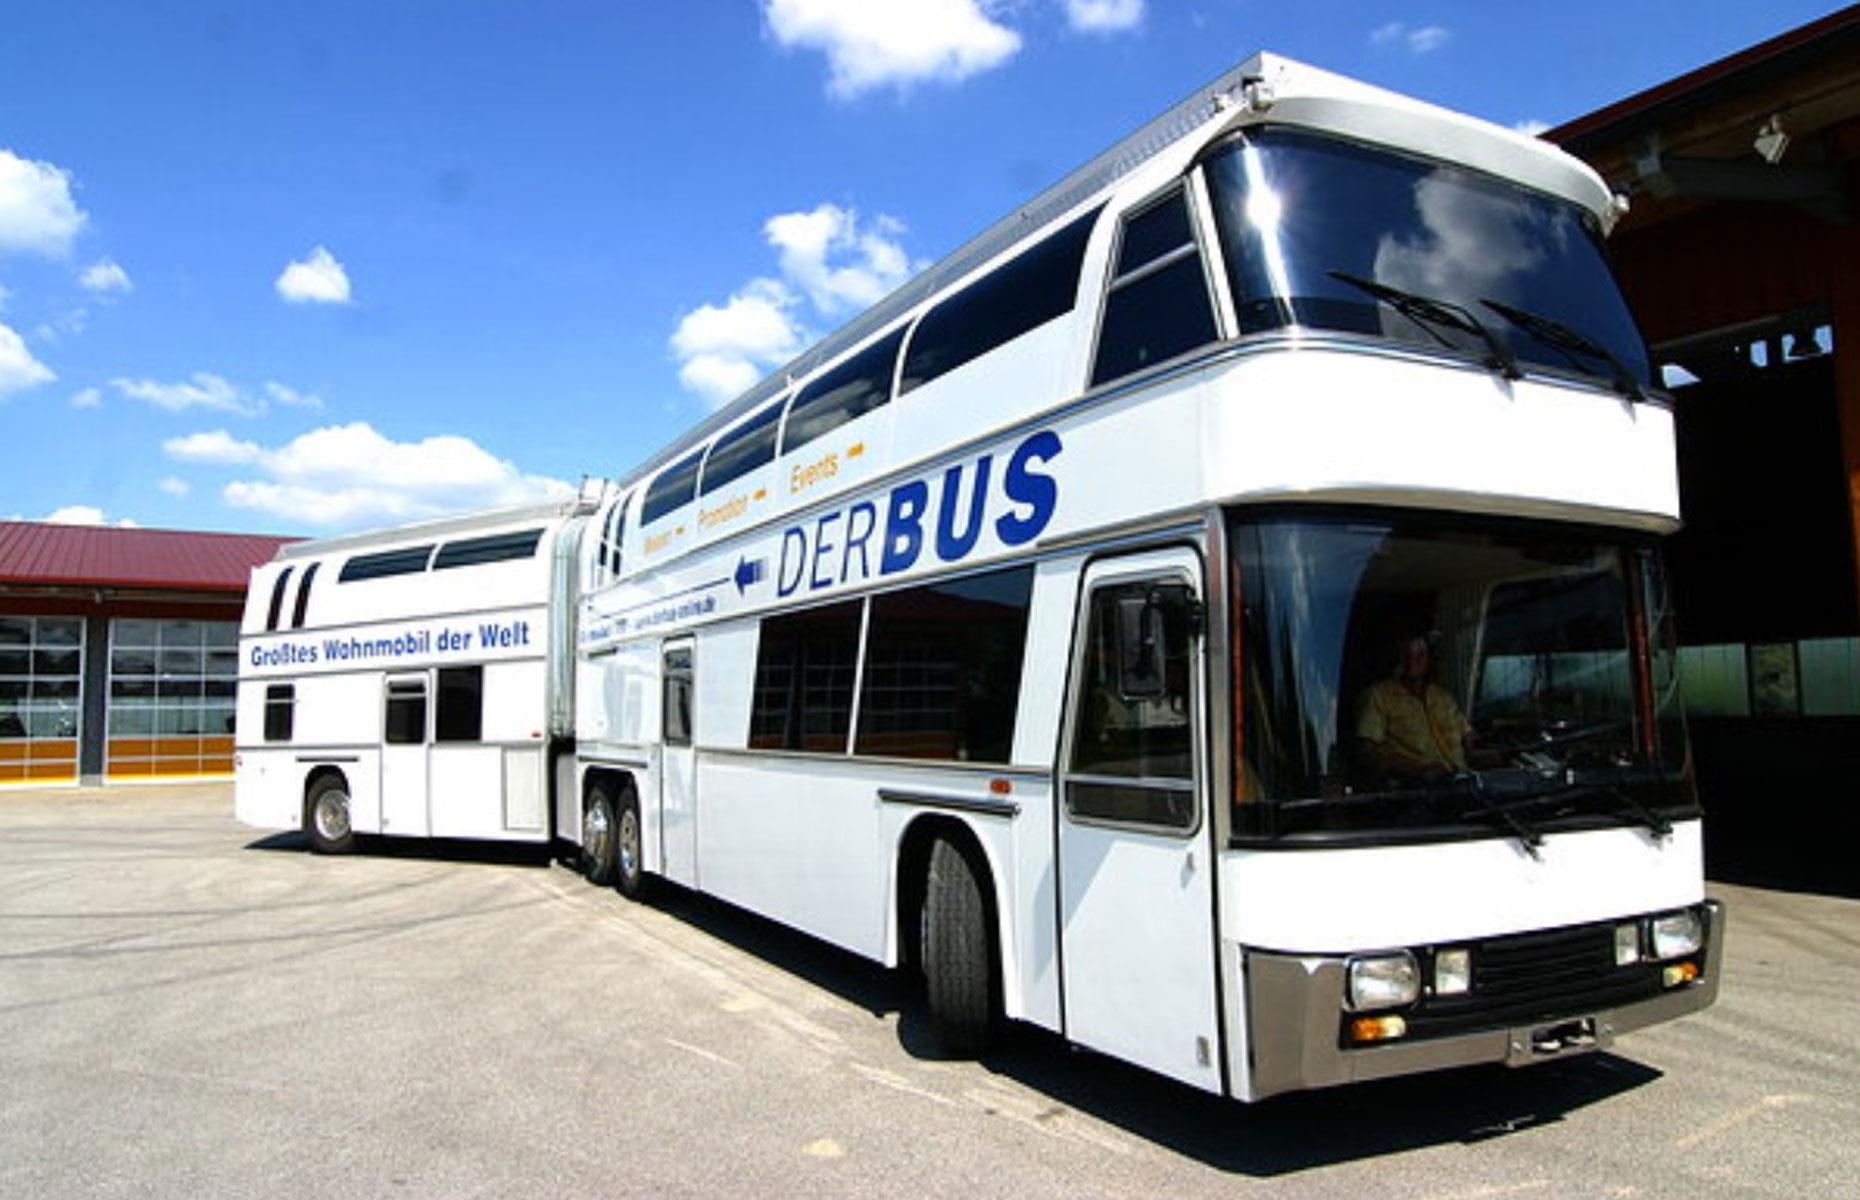 <p>This veteran colossus of a vehicle, which featured 170 seats, was built back in 1975. Debuting as the first double-decker articulated bus, known as the Neoplan Jumbocruiser, it was unveiled in Frankfurt, Germany, and scored a spot in that year's <em>Guinness Book of World Records </em>as the biggest bus ever.</p>  <p>Fast-forward to 1995 and auto enthusiast Manfred Esterbauer resurrected this icon of German design and engineering, renaming it <a href="http://derbus.de/">DerBus</a>. According to <a href="https://www.autoevolution.com/news/derbus-titanic-sized-articulated-bus-is-the-worlds-biggest-and-most-luxurious-motorhome-223231.html"><em>autoevolution</em></a>, only 11 such buses were ever made. </p>